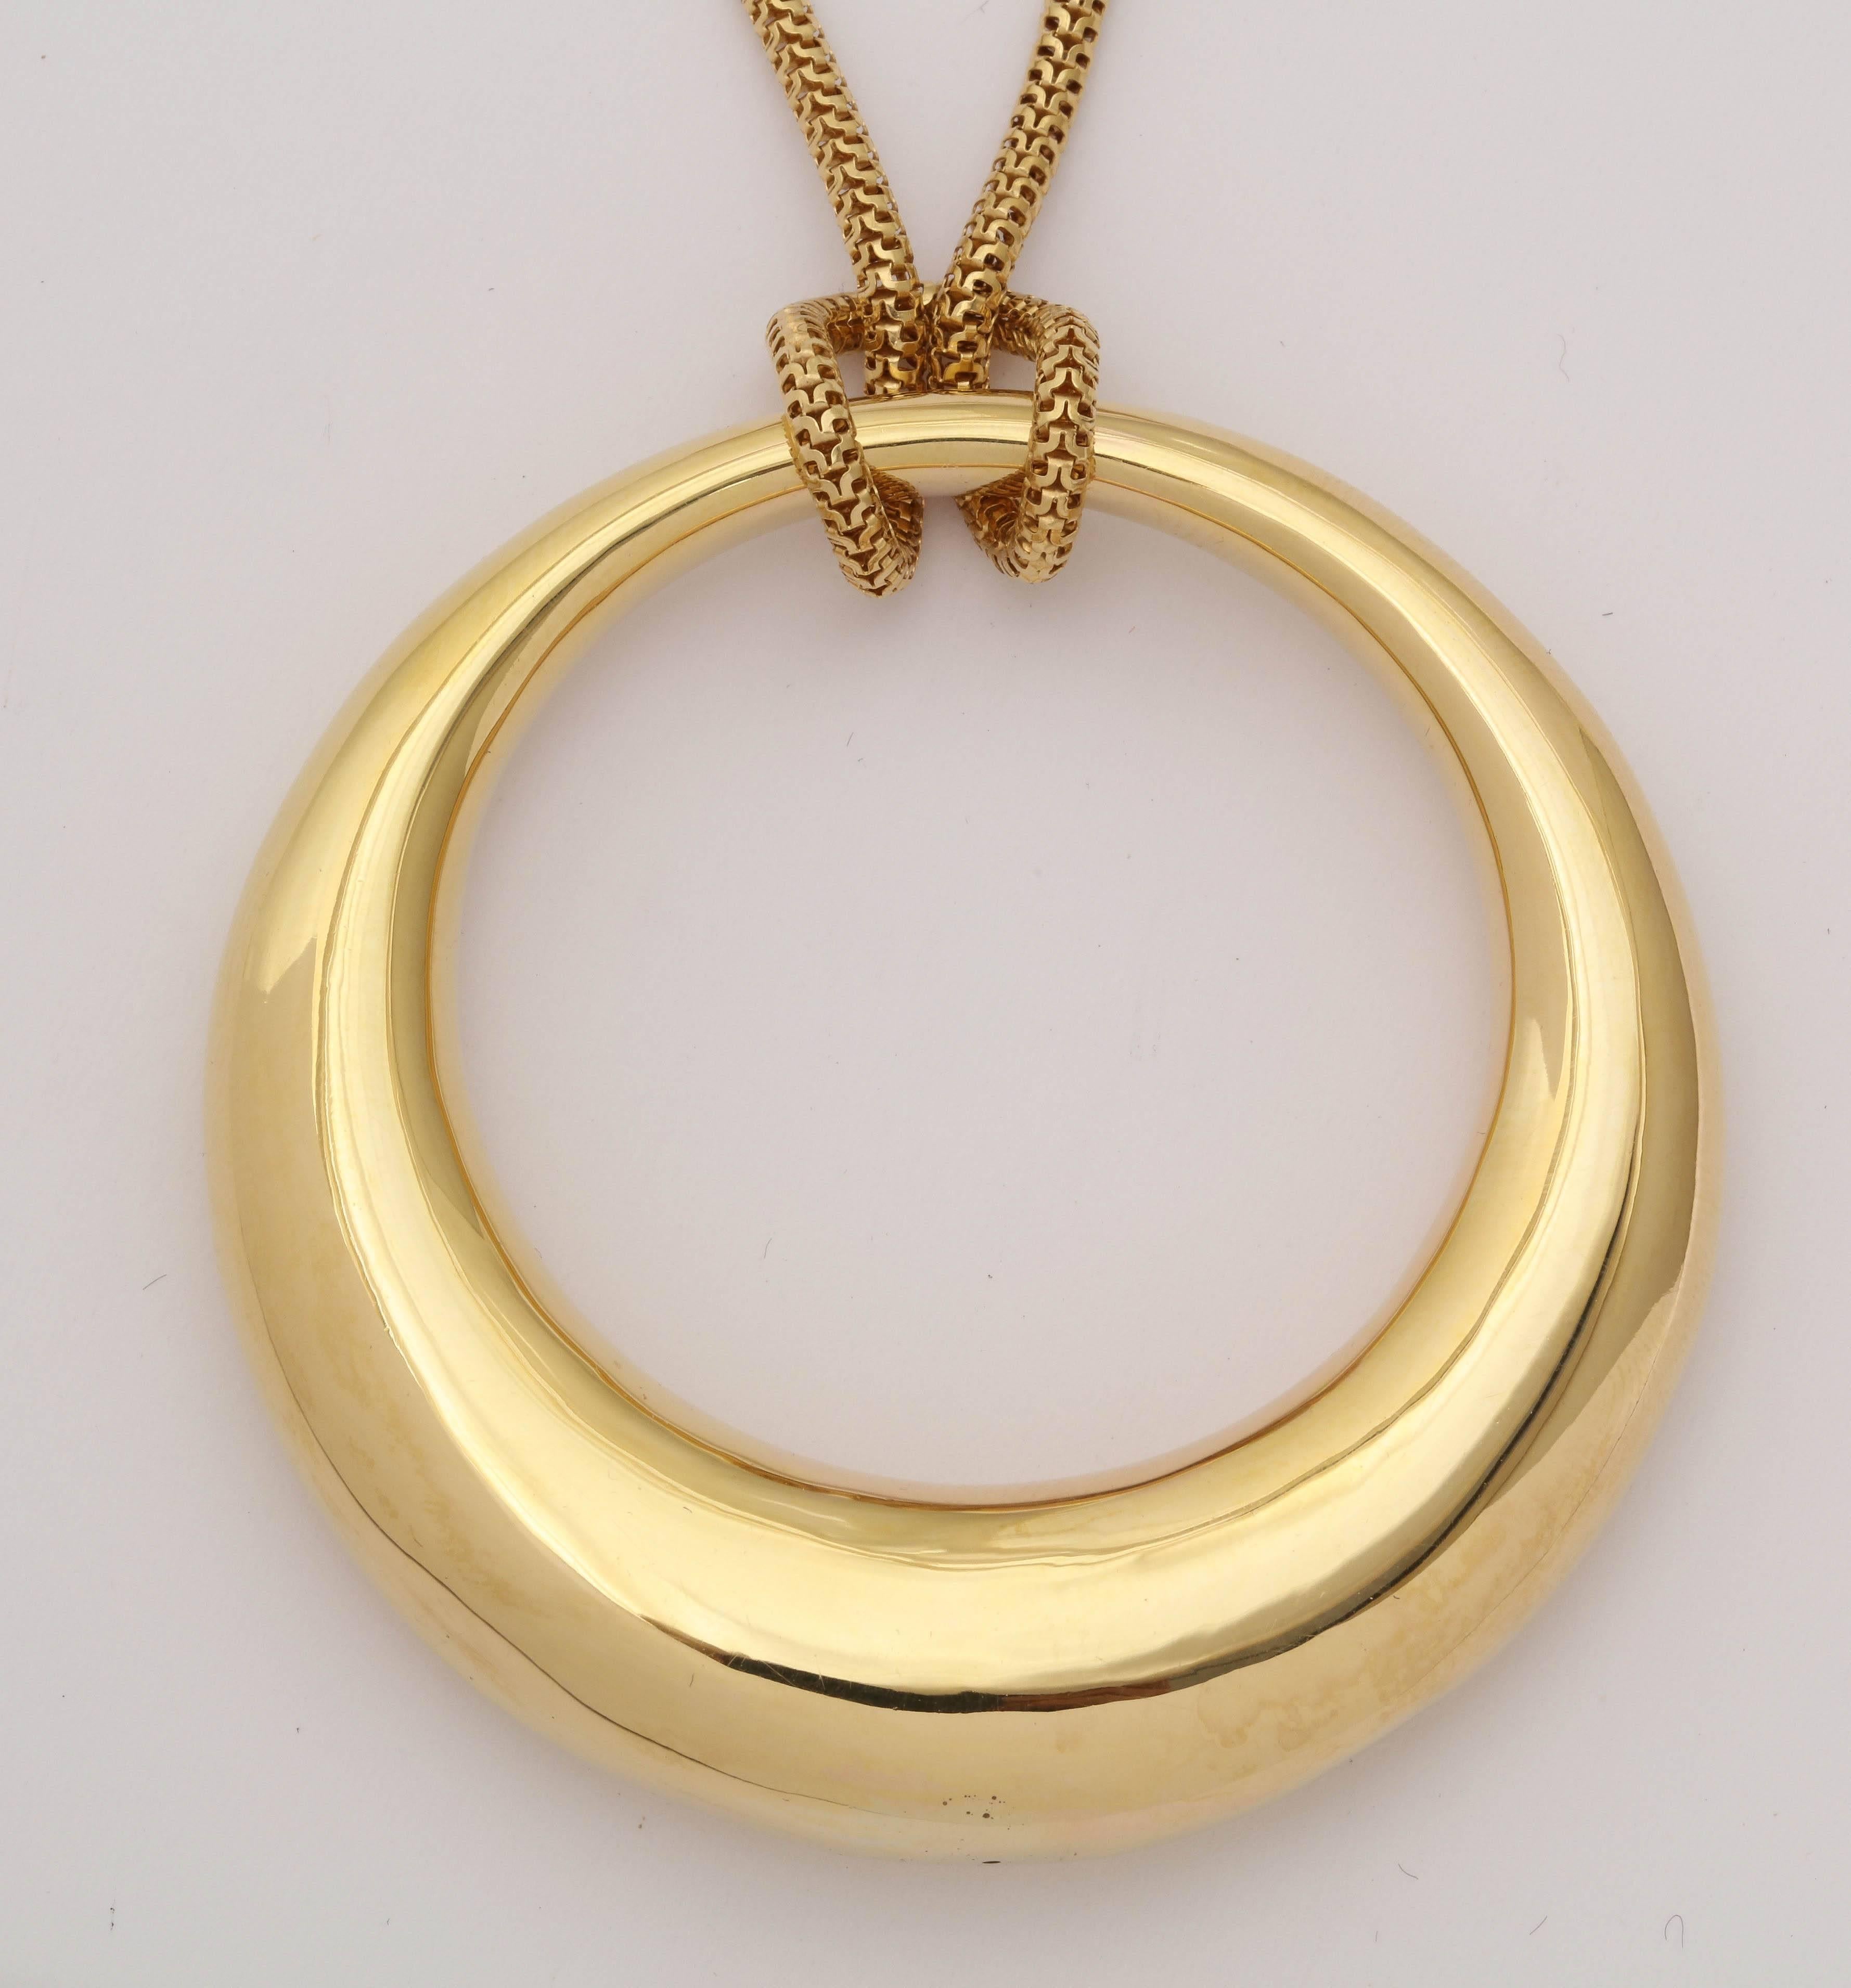 1980s Oblong Shaped Circle Pendant Wrapped in Reptile Box Link Gold Chain 1